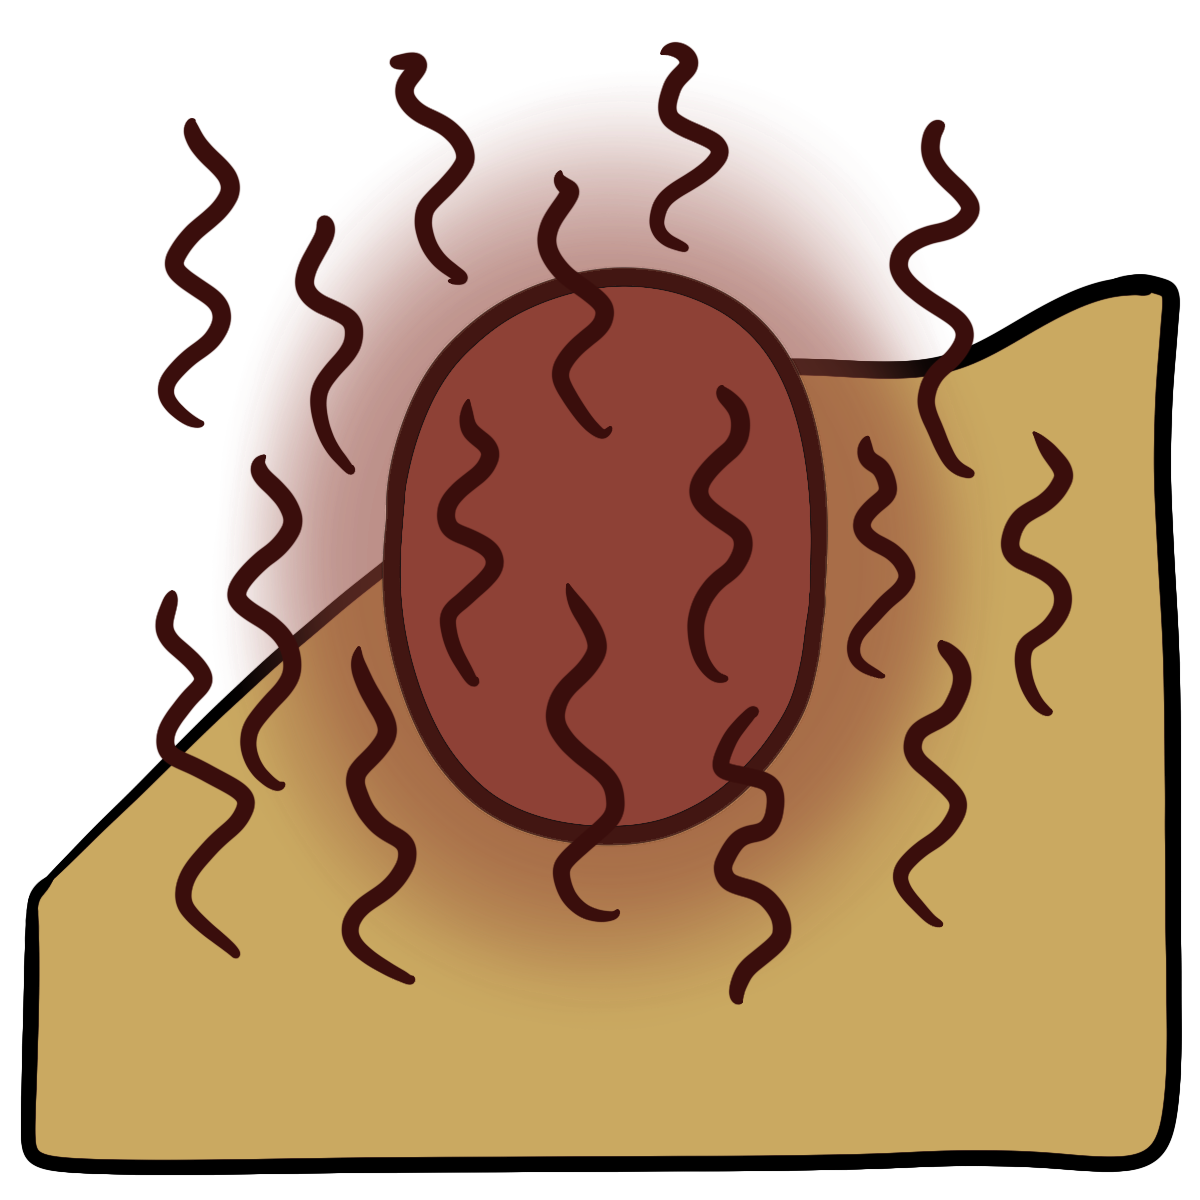 A red glowing oval with vertical squiggly dark red lines around it. Curved yellow skin fills the bottom half of the background.